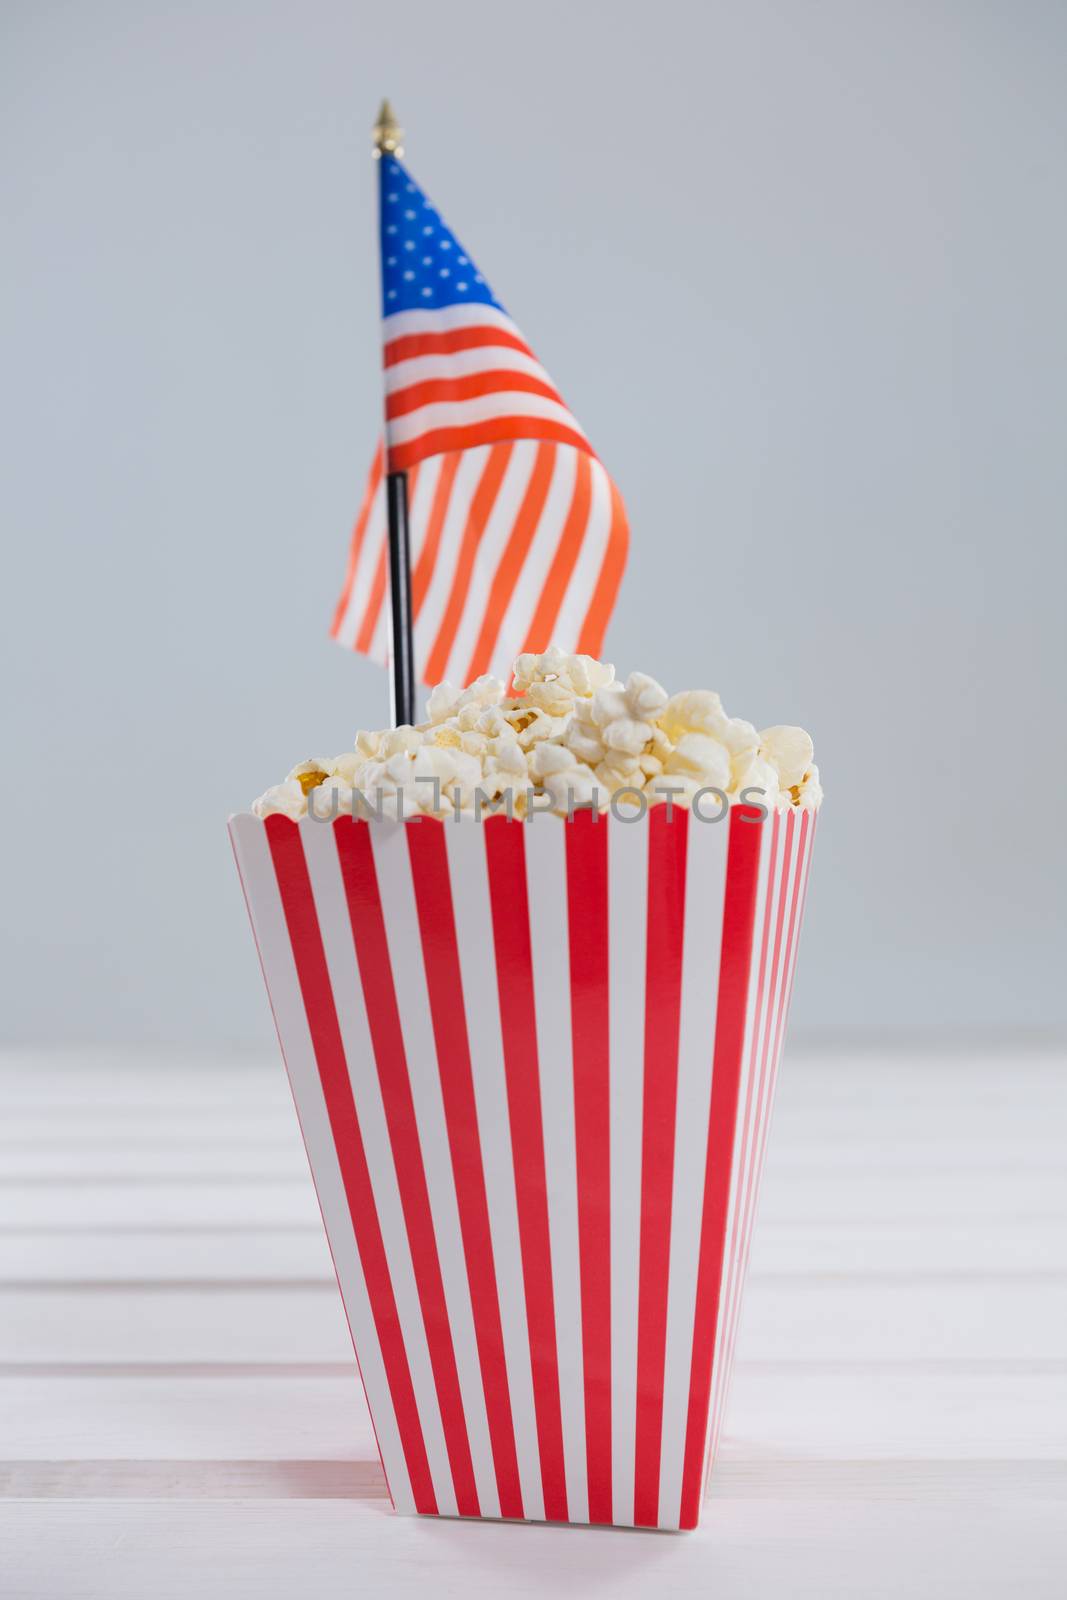 Close-up of popcorn with 4th july theme on wooden table